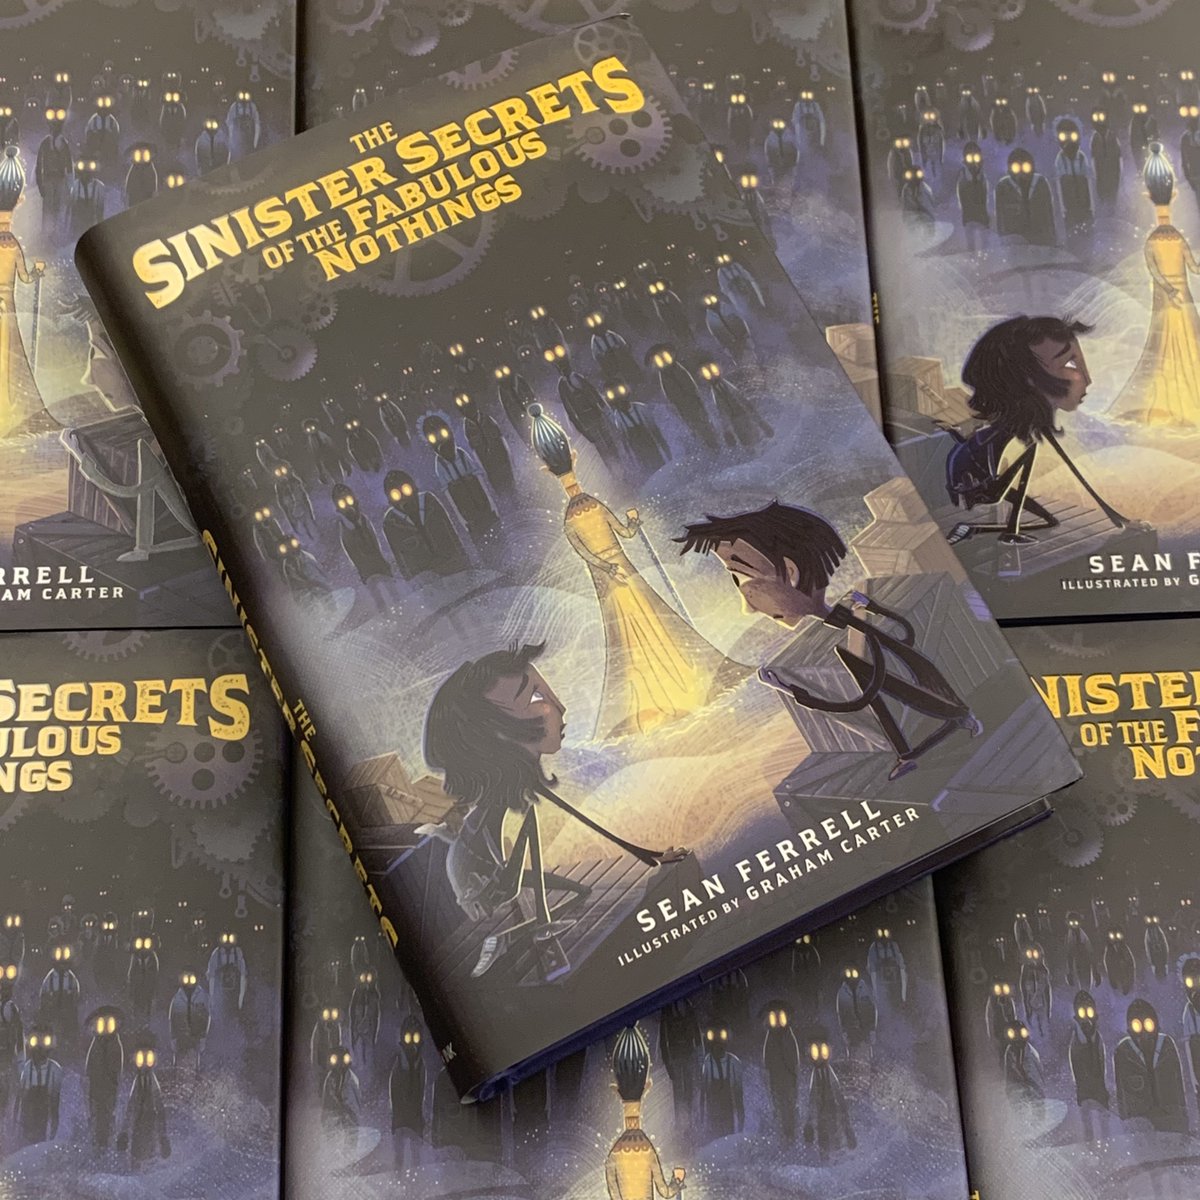 Technological wonders and terrors combine to weave an enchanting tale of finding your own way to belong in the second book in the sweeping Sinister Secrets series. THE SINISTER SECRETS OF THE FABULOUS NOTHINGS is on shelves next month! #mglit ow.ly/6WyX50RyTBt